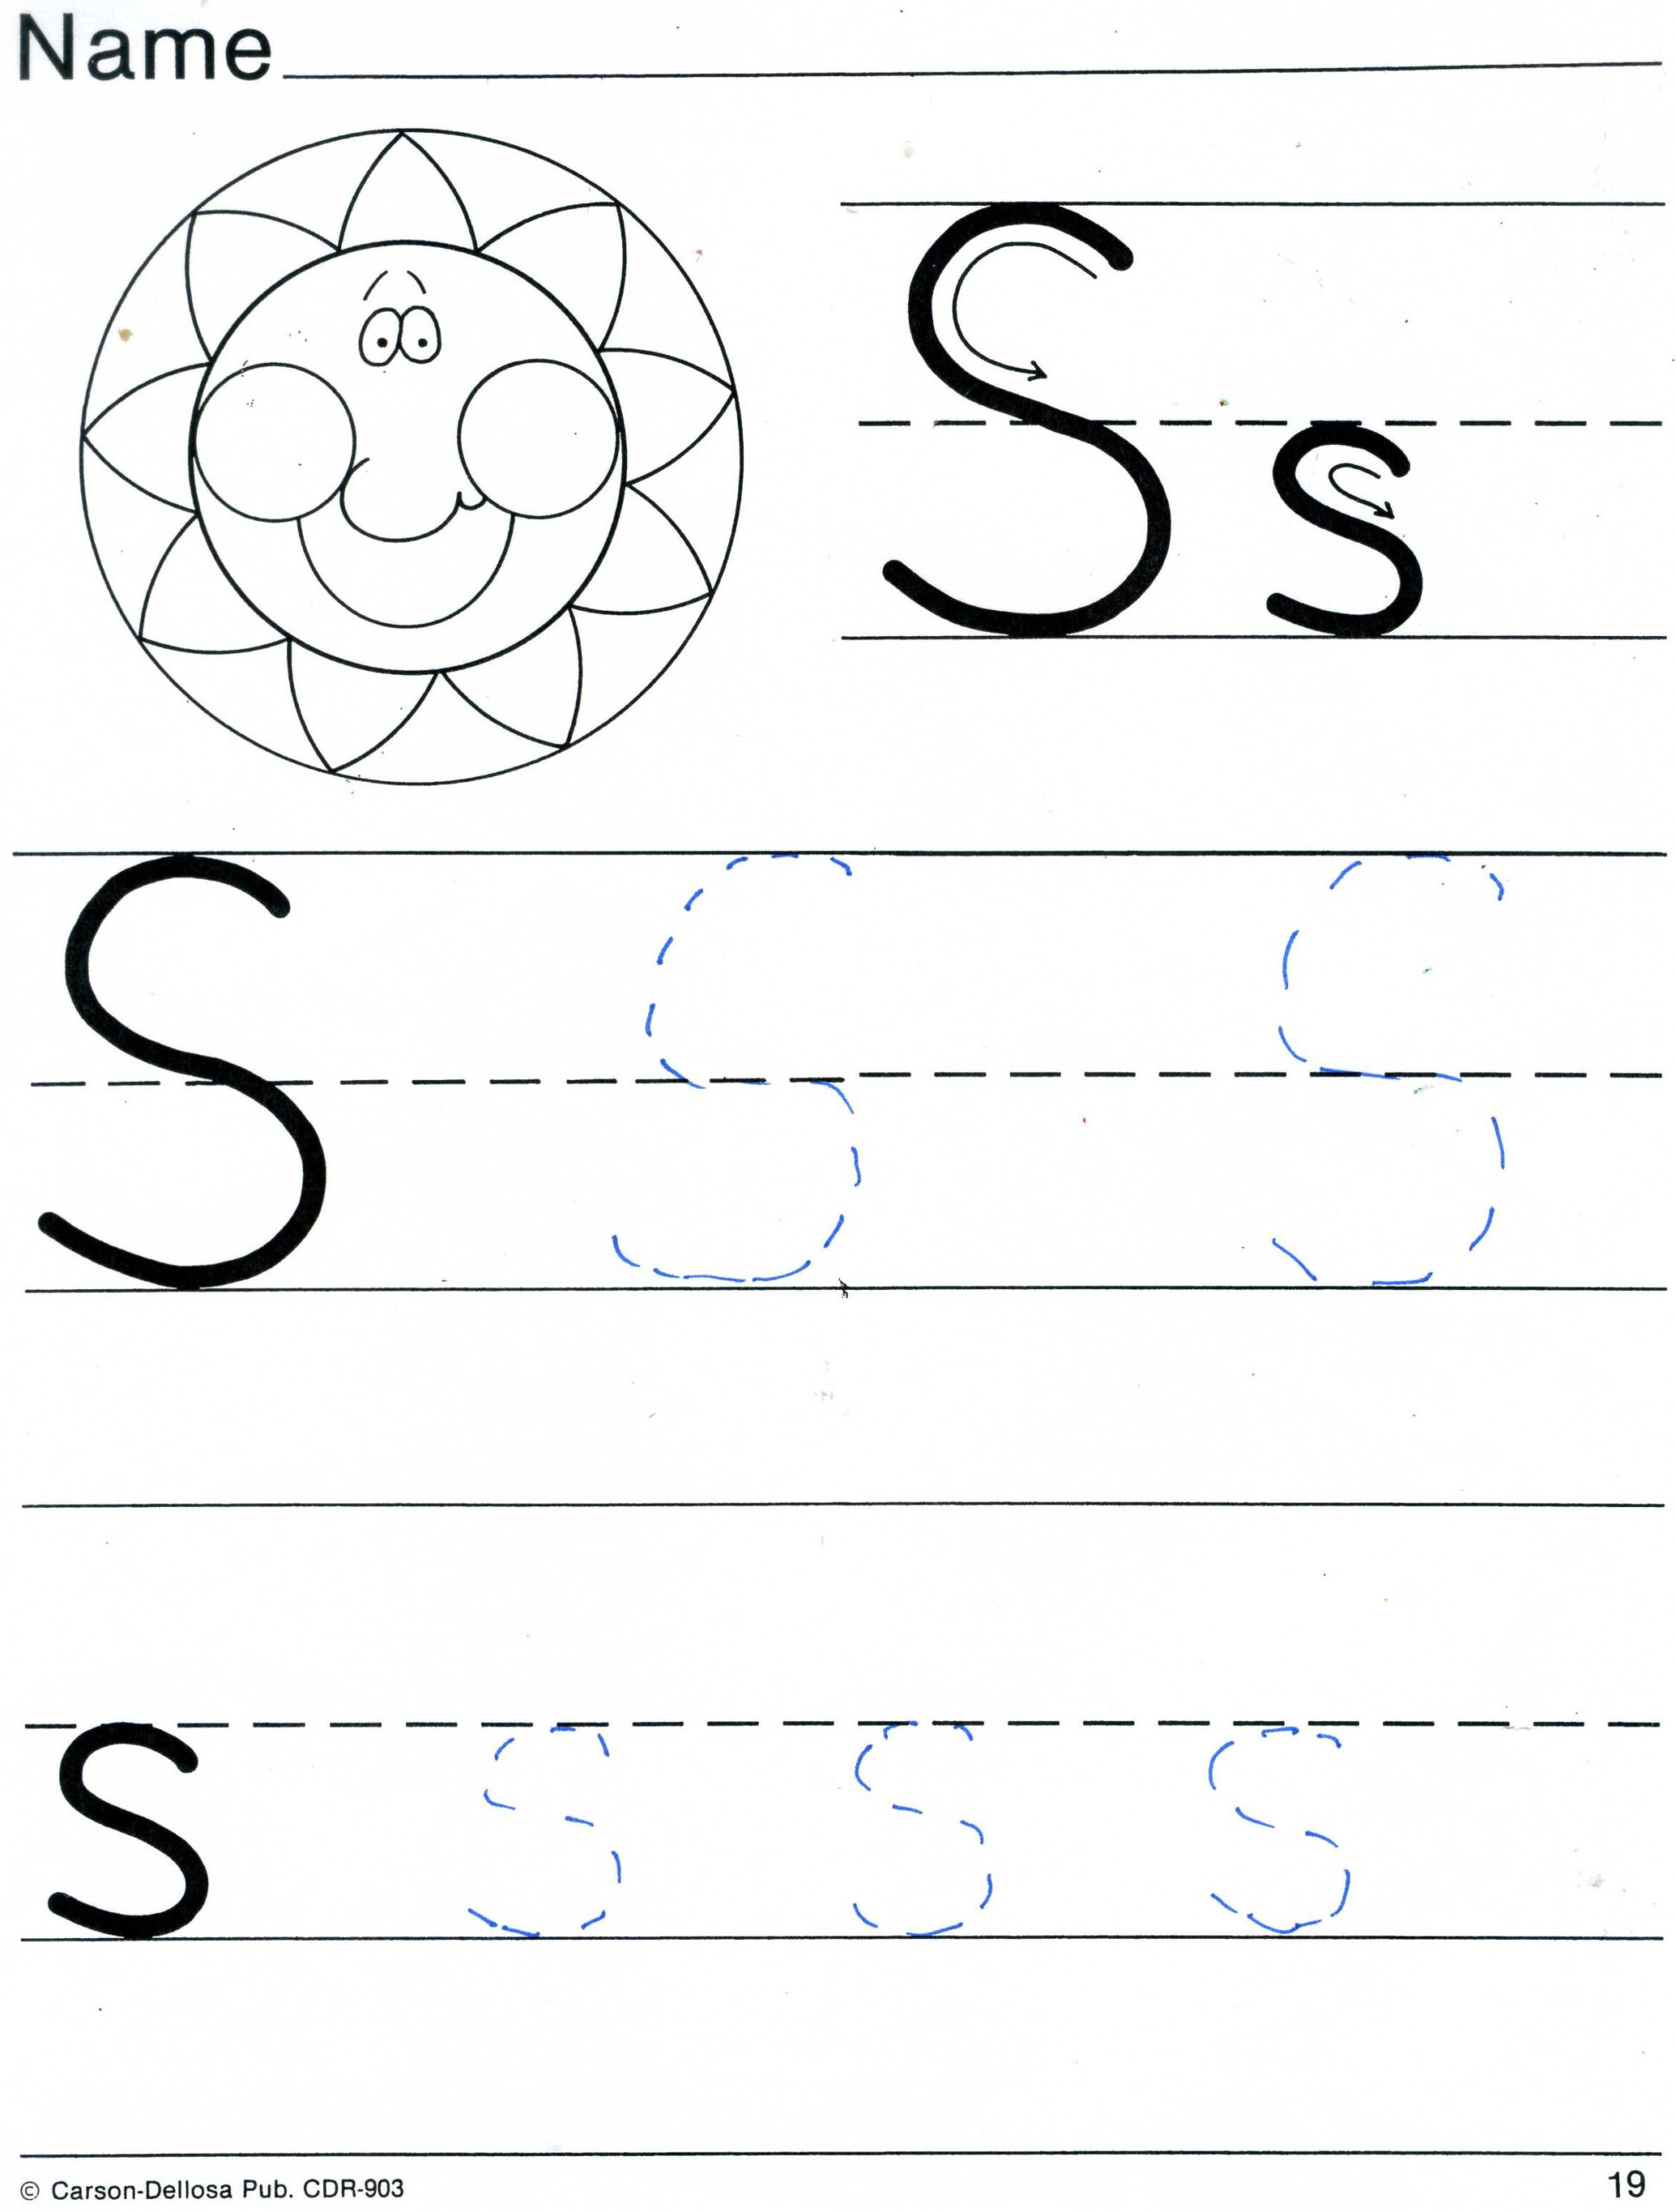 Practice Sheets For Parents intended for S Letter Tracing